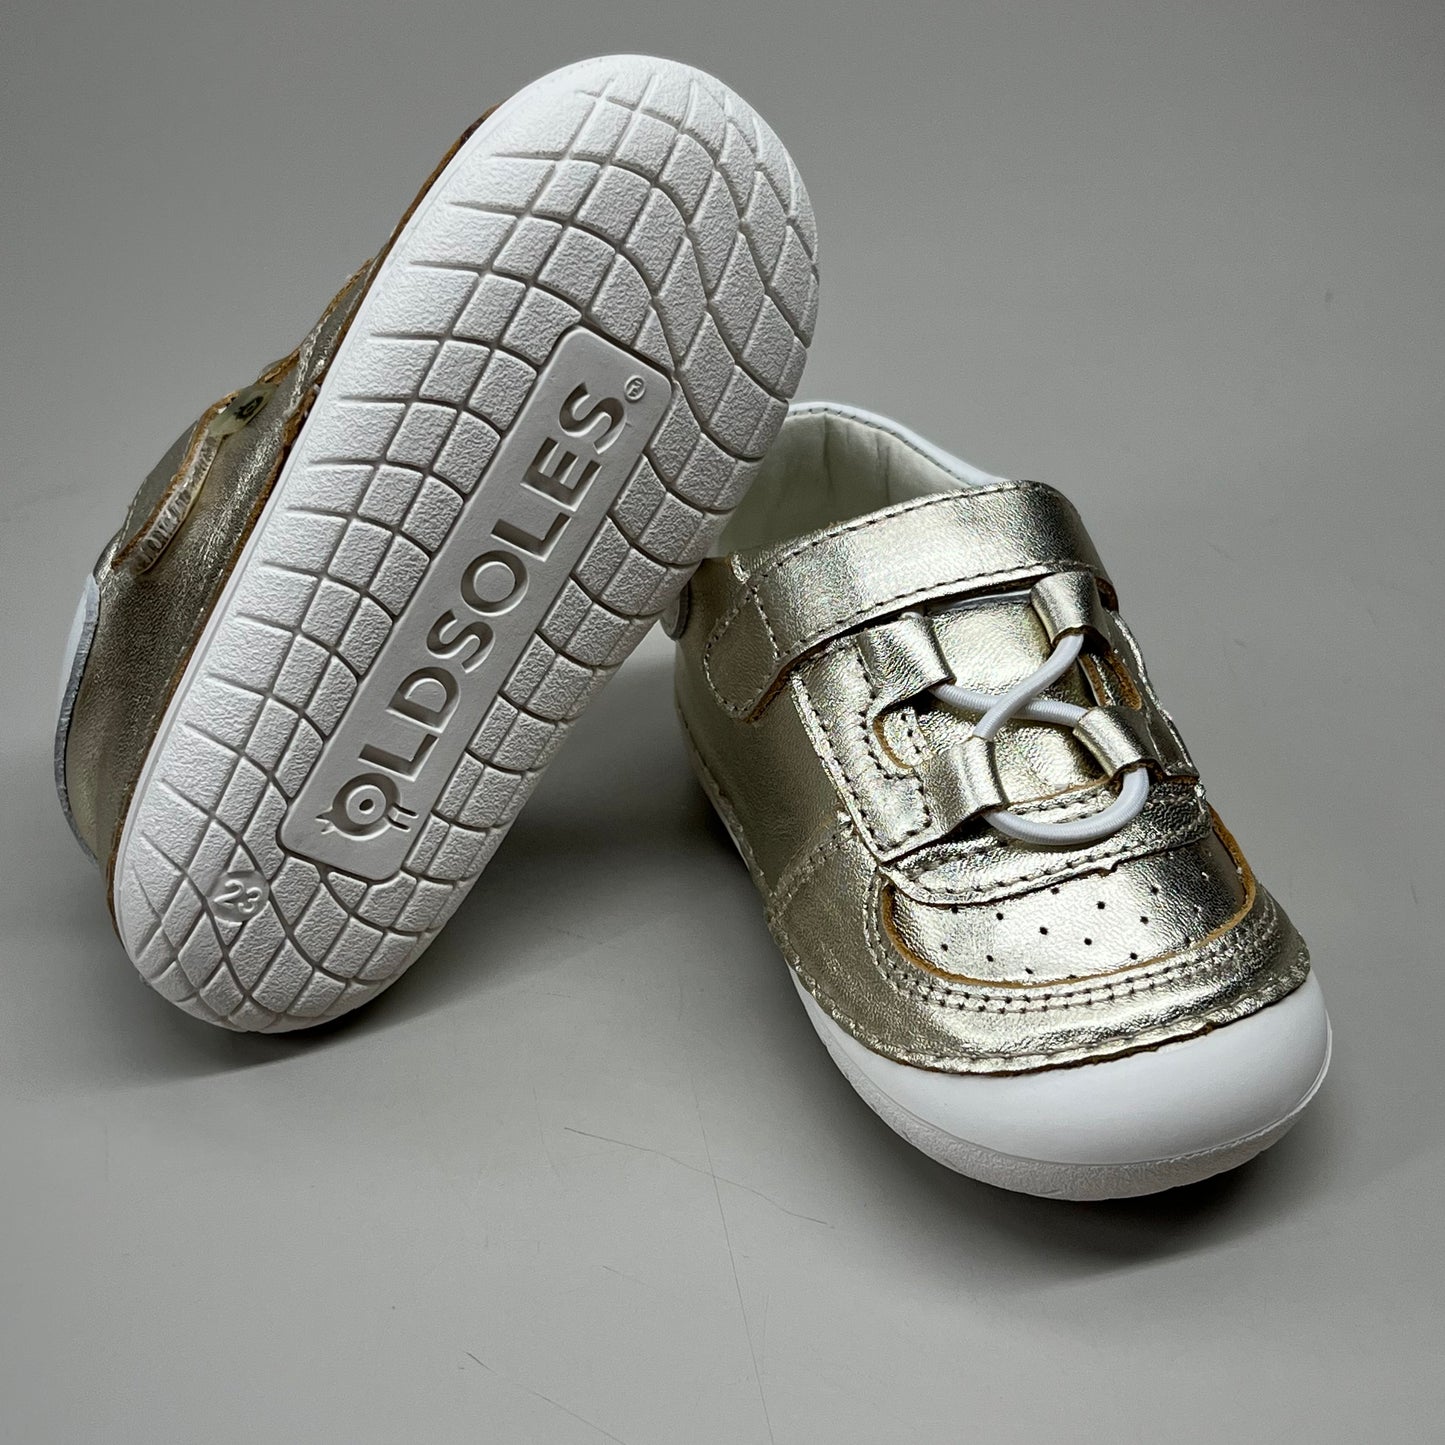 OLD SOLES Baby Rebel Pave Leather Shoe Sz 25 US 9 Gold/White #4090